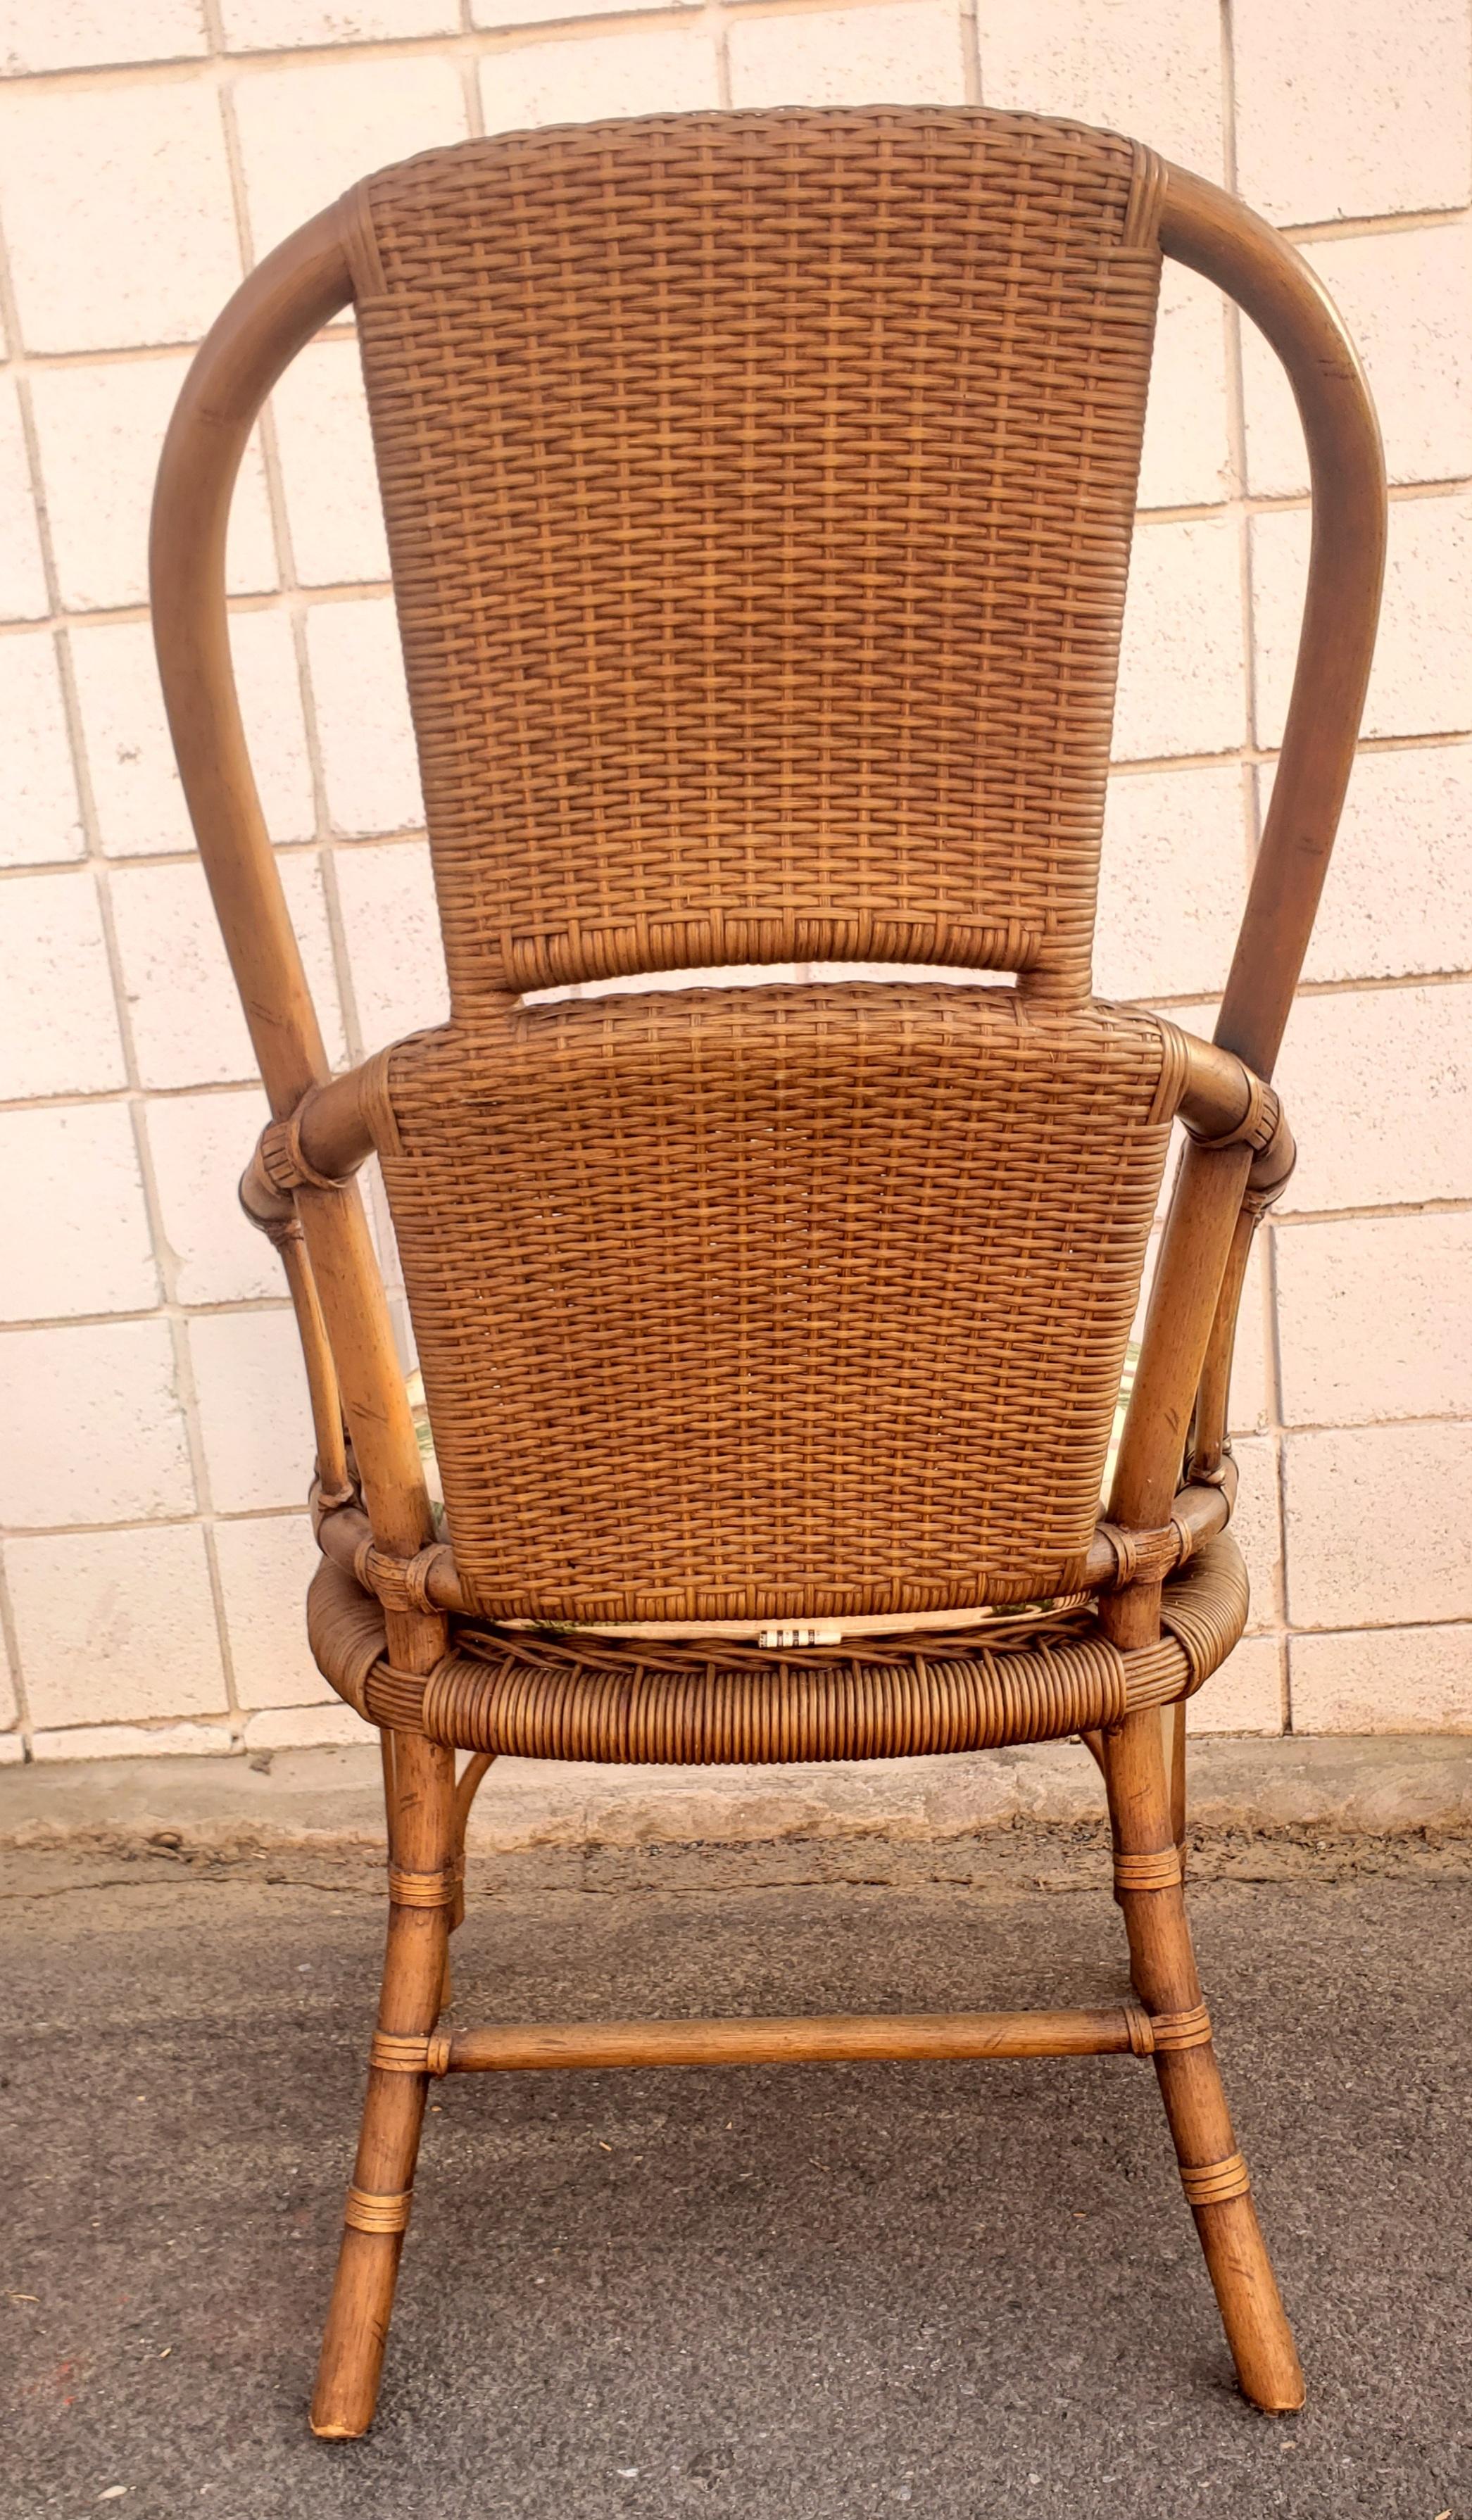 1970s High Hoop Back Rattan and Leather Straps Arm Chairs, a Pair For Sale 1